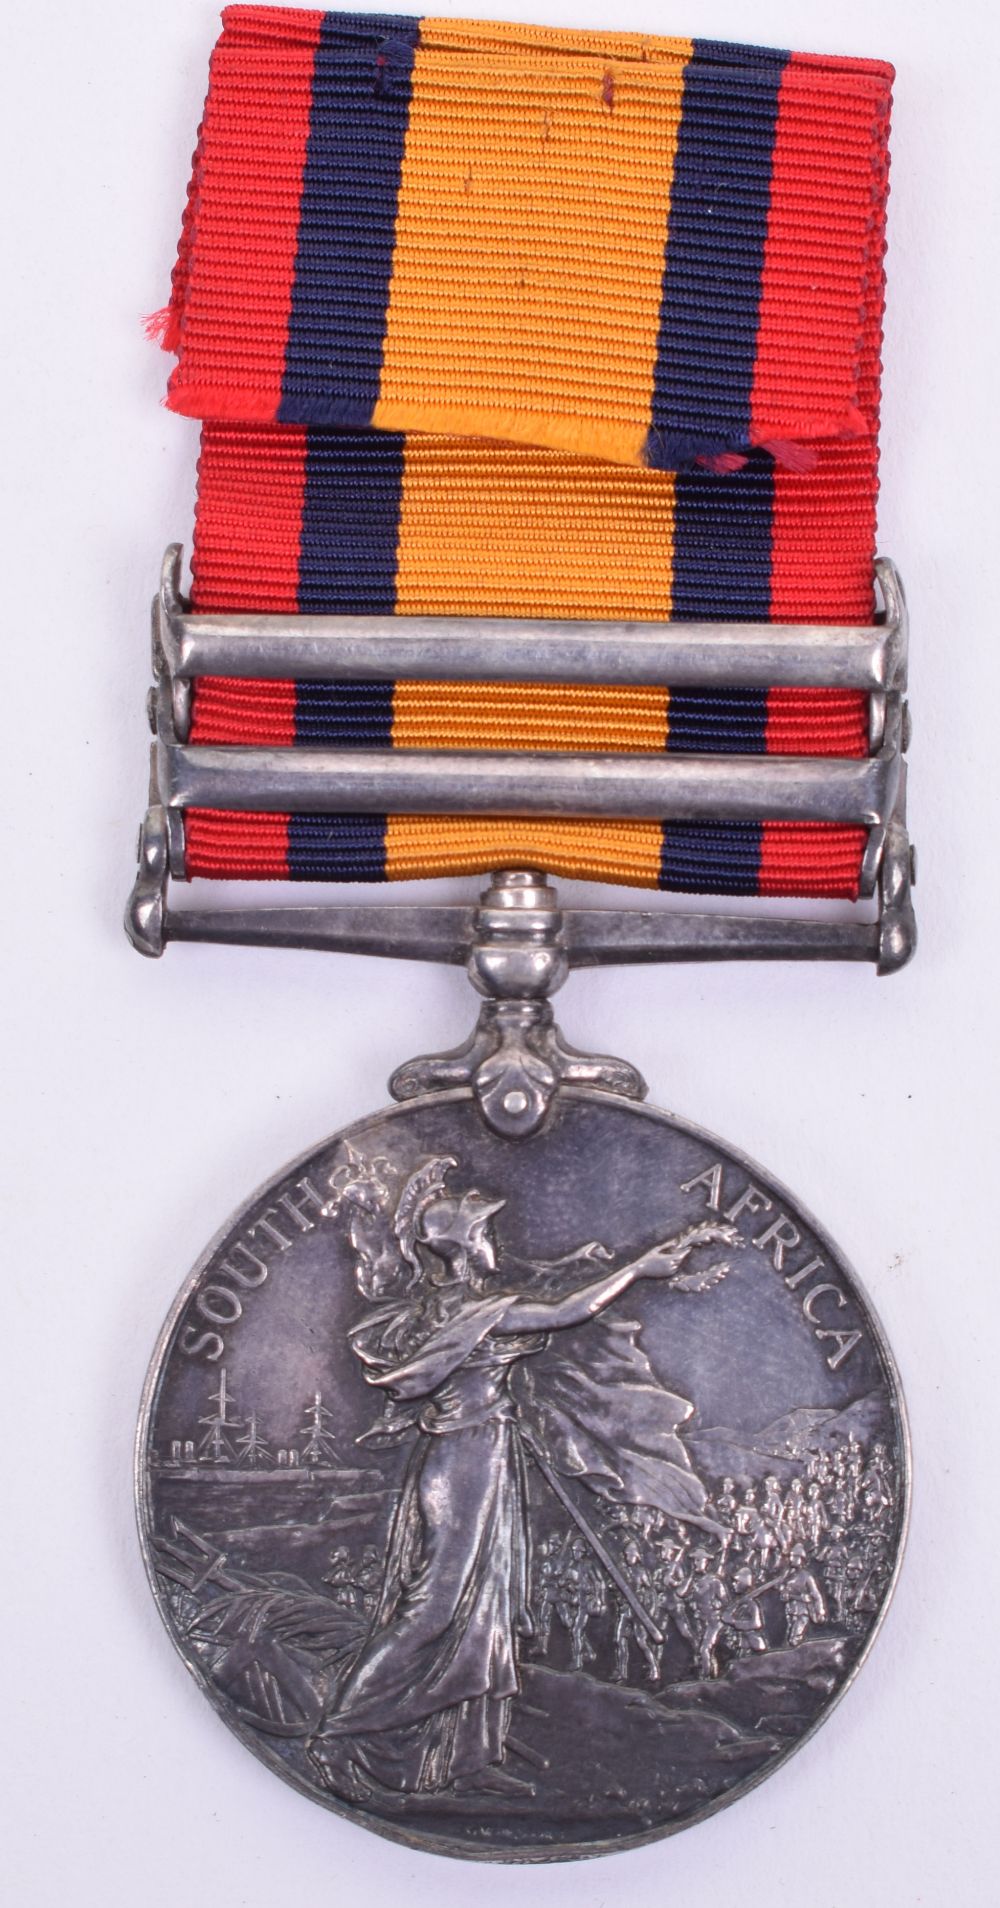 Queens South Africa Officers Boer War Campaign Medal Sherwood Foresters/ Lancashire Fusiliers - Image 3 of 3